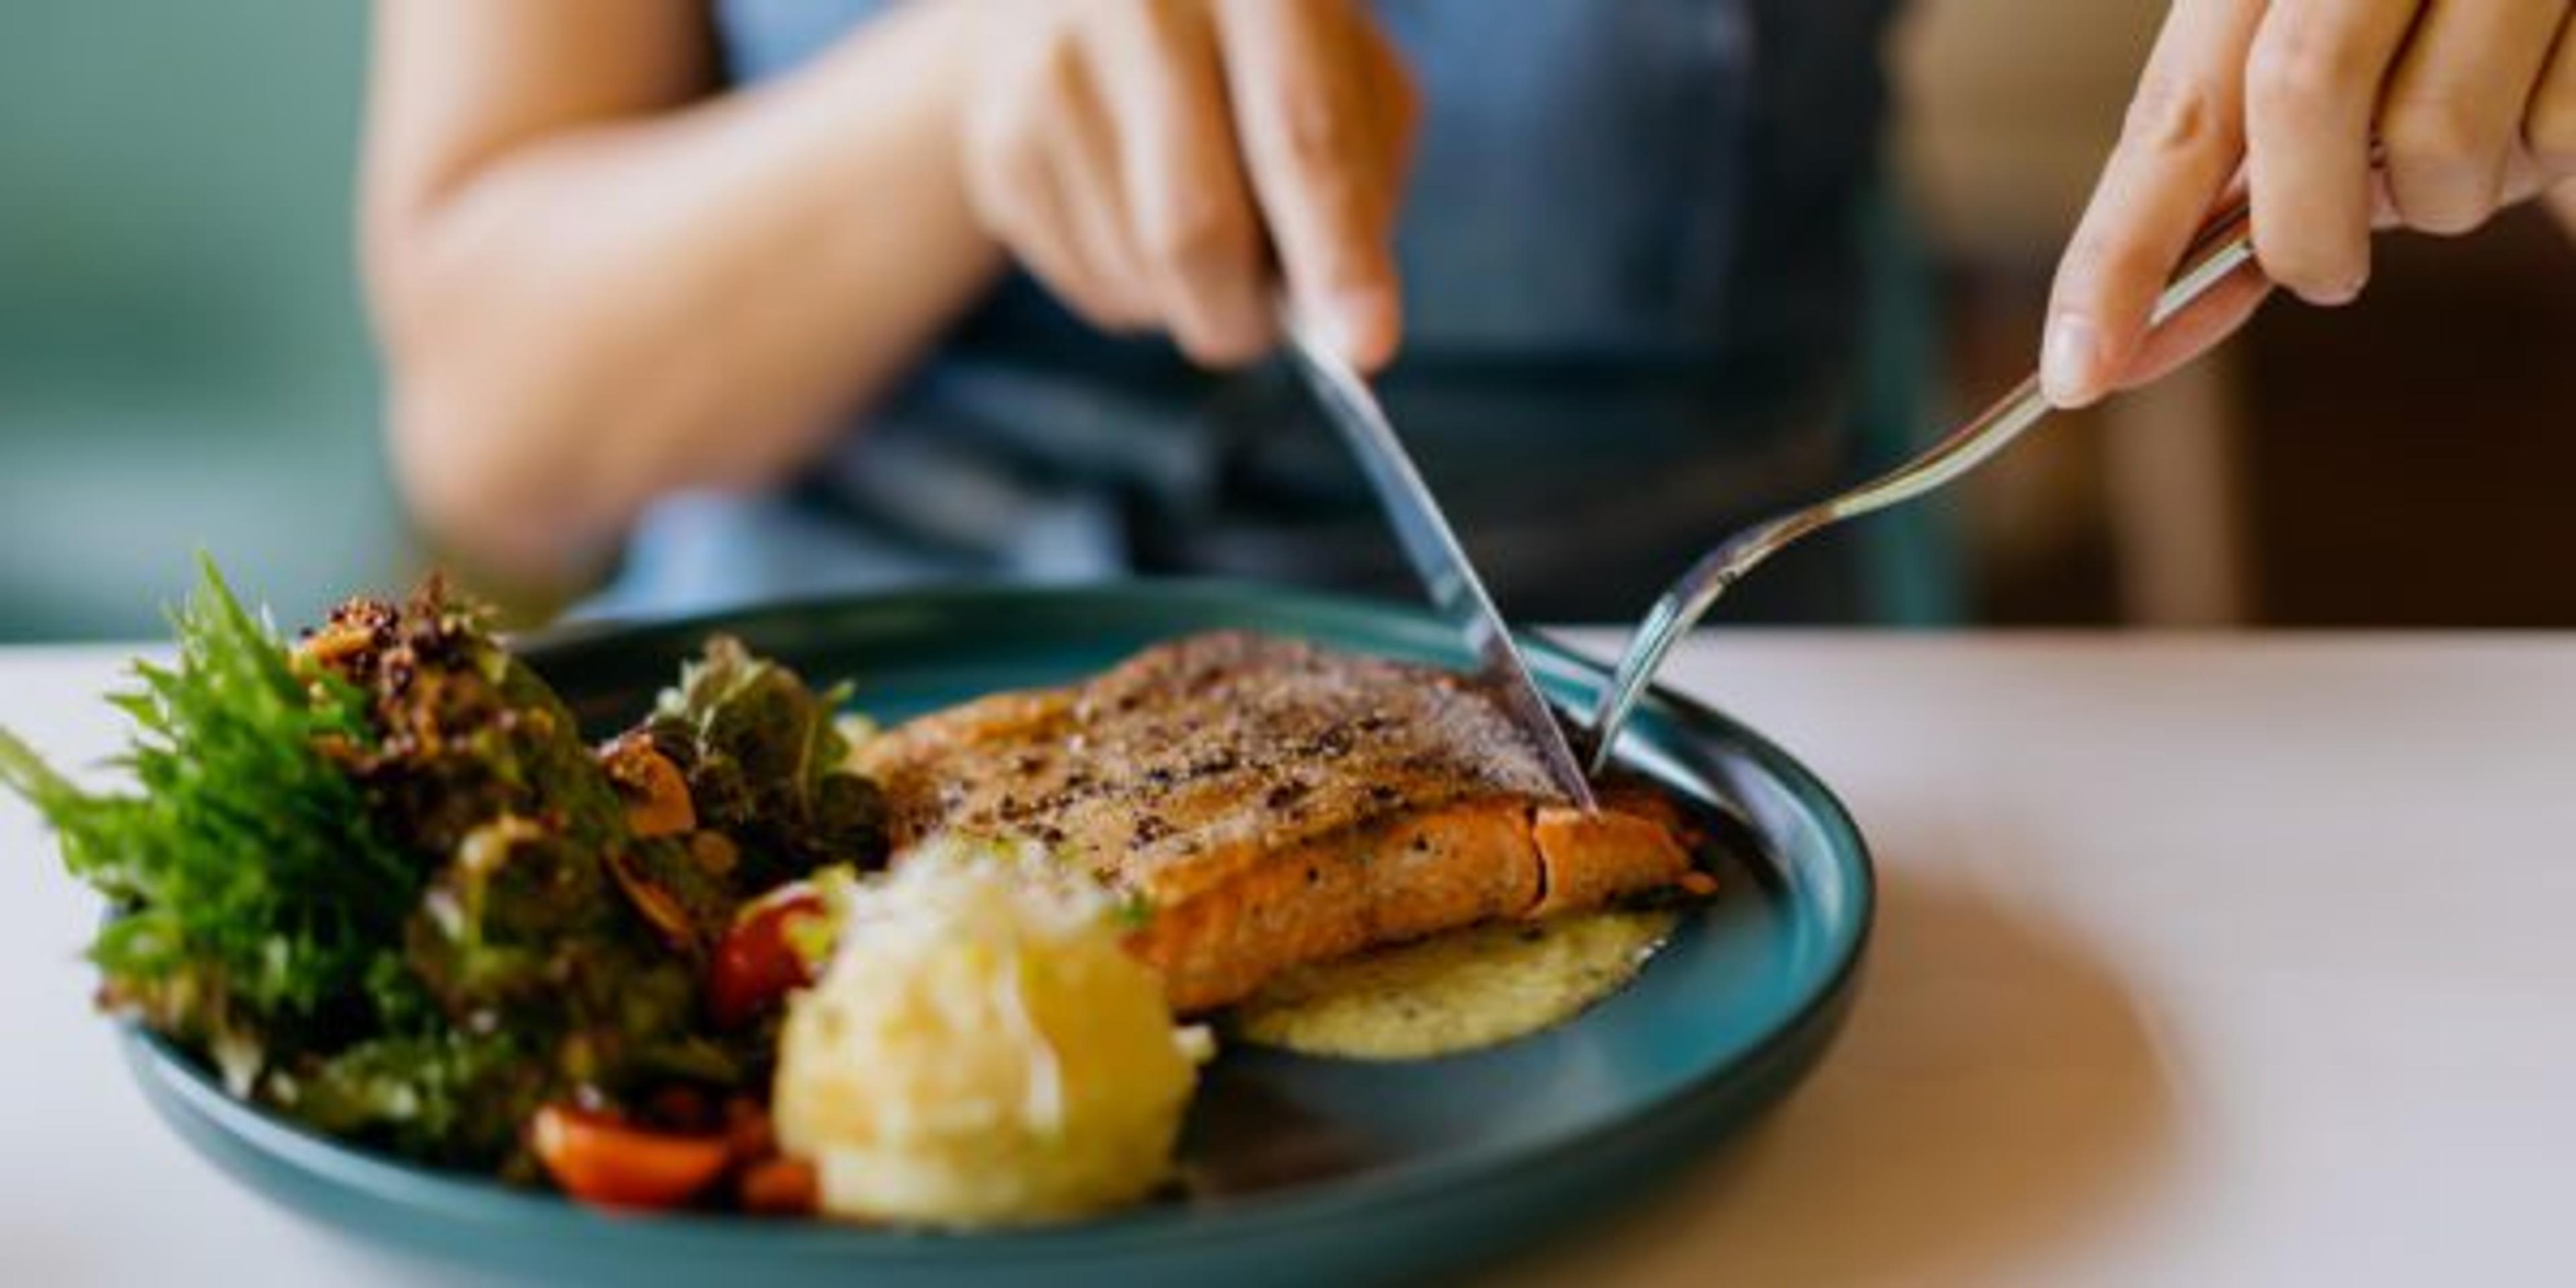 Close up shot of a woman eating pan-fried salmon with a knife and fork in a cafe.